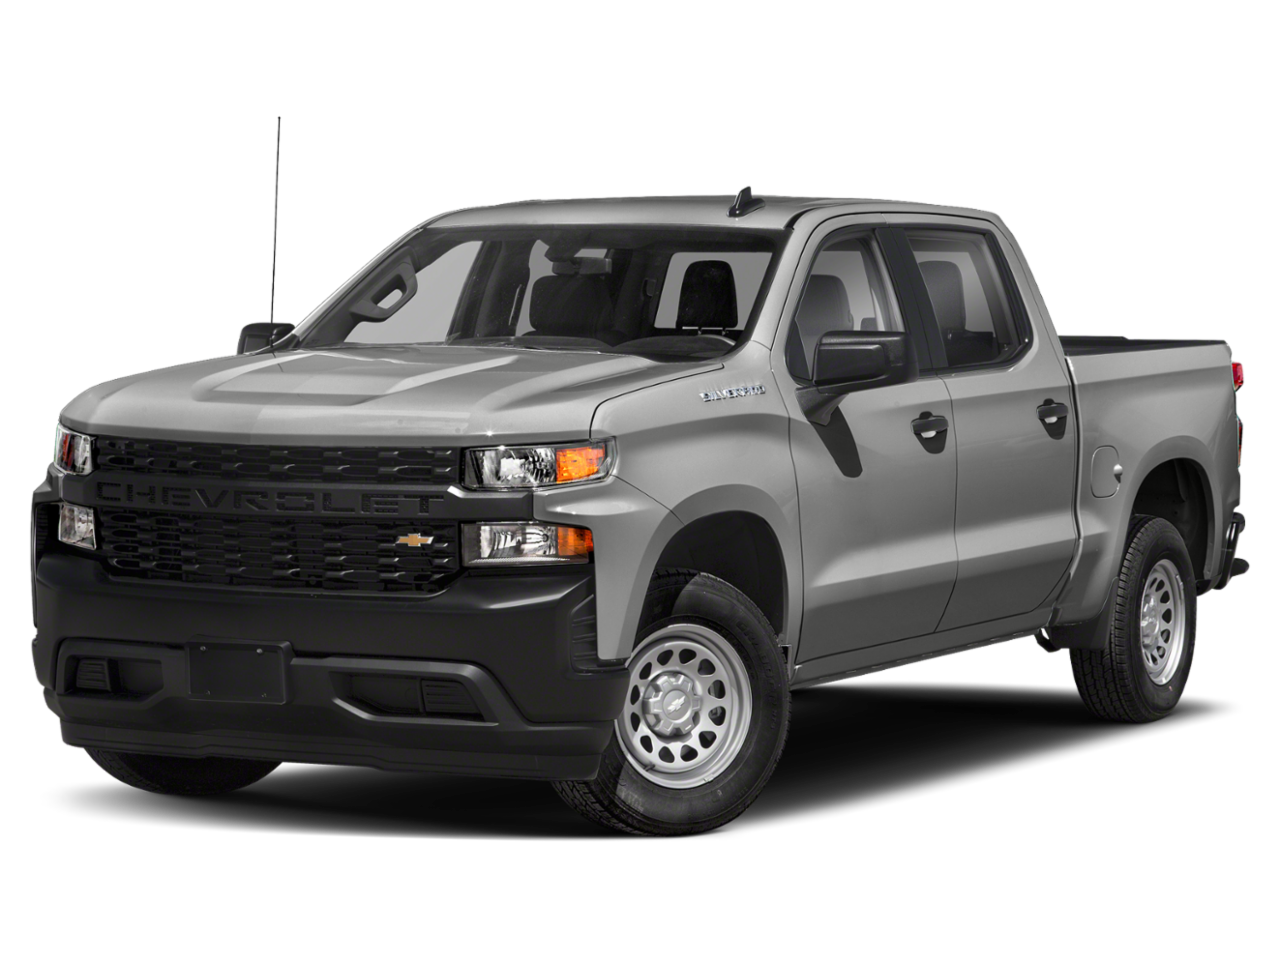 Experience the New 2021 Chevrolet Silverado 1500 in Broussard